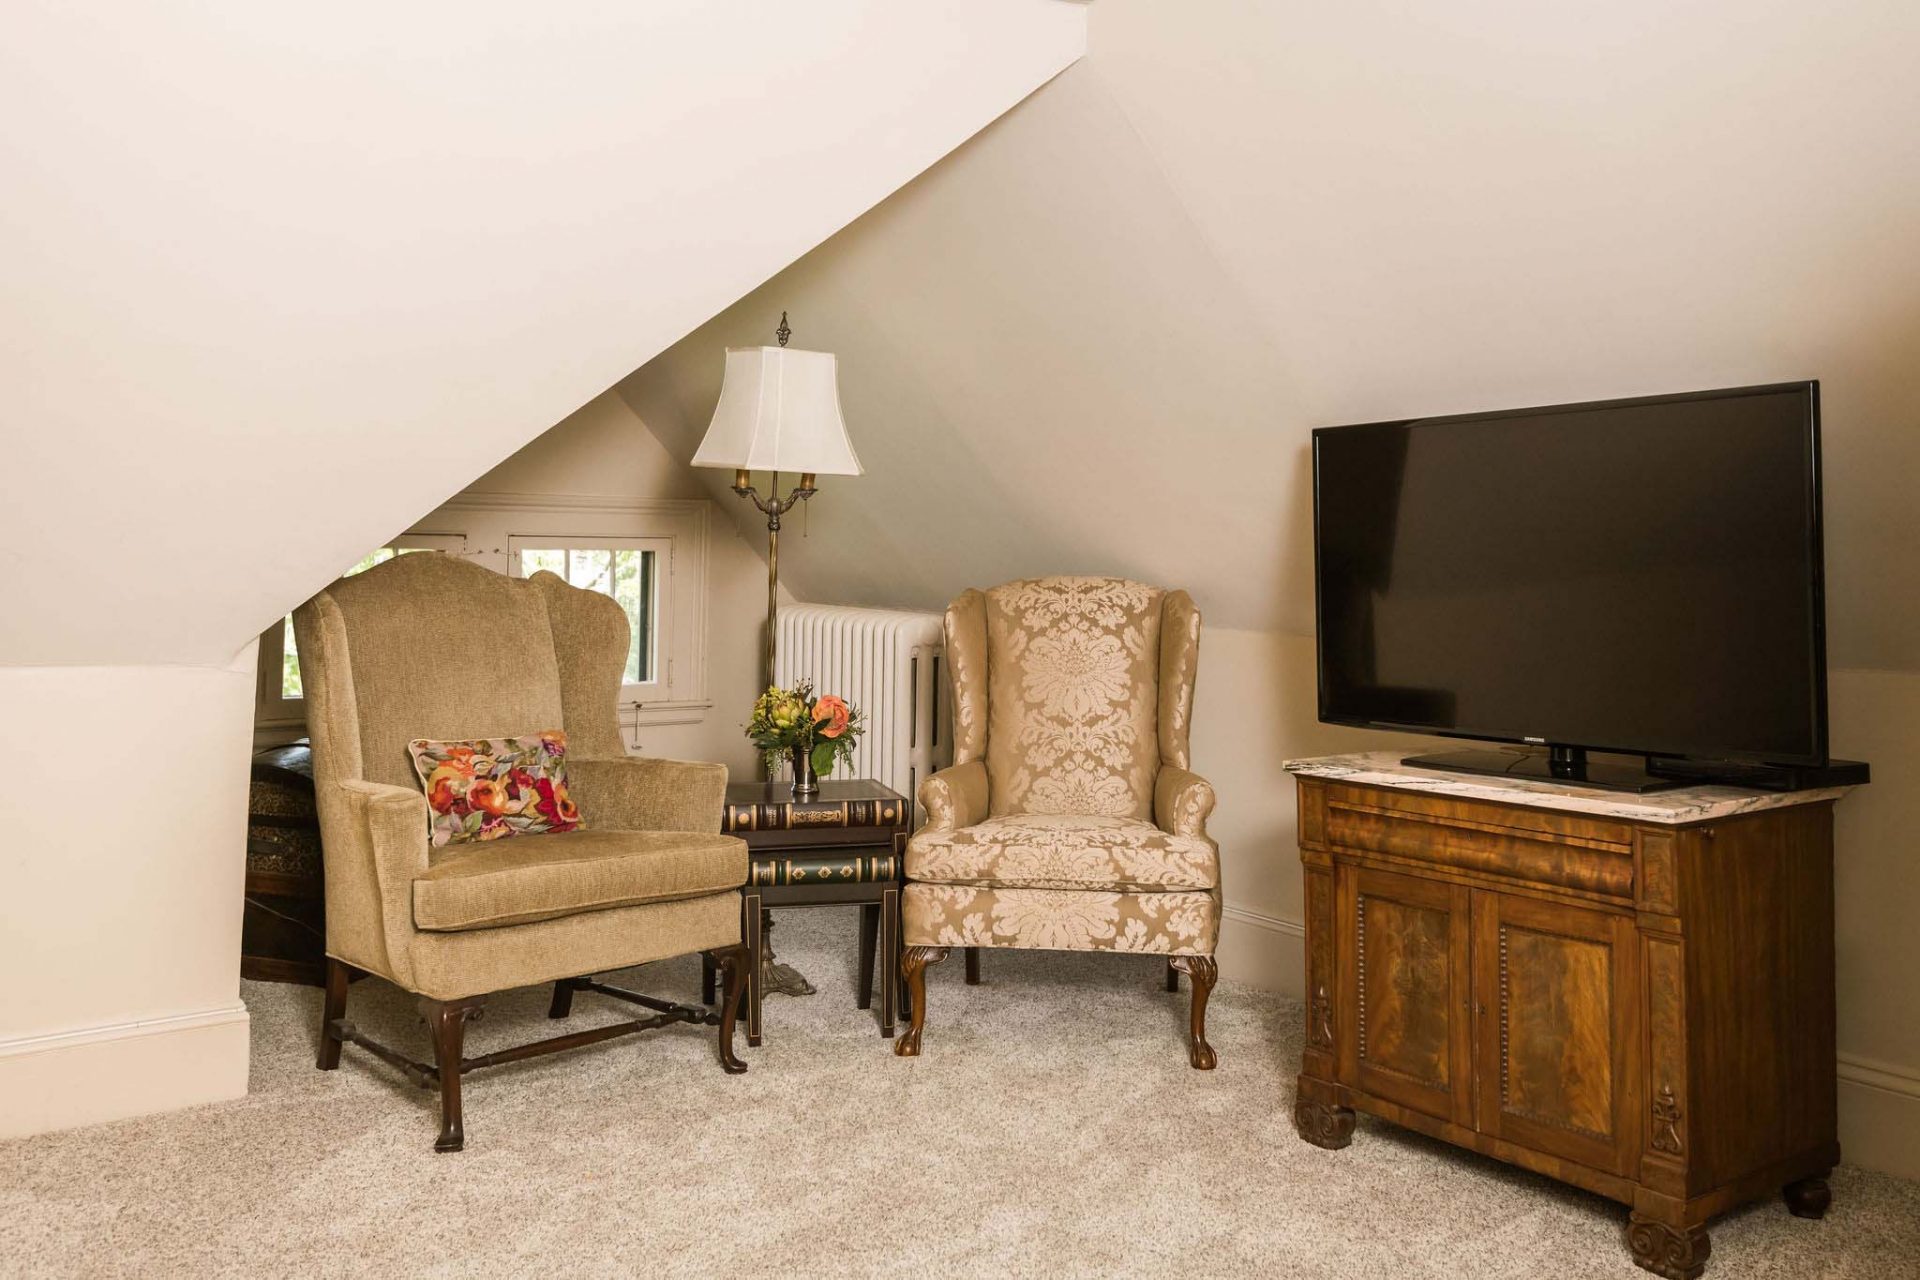 A carpeted relaxing area in the attic with two armchairs, a standing lamp and TV.